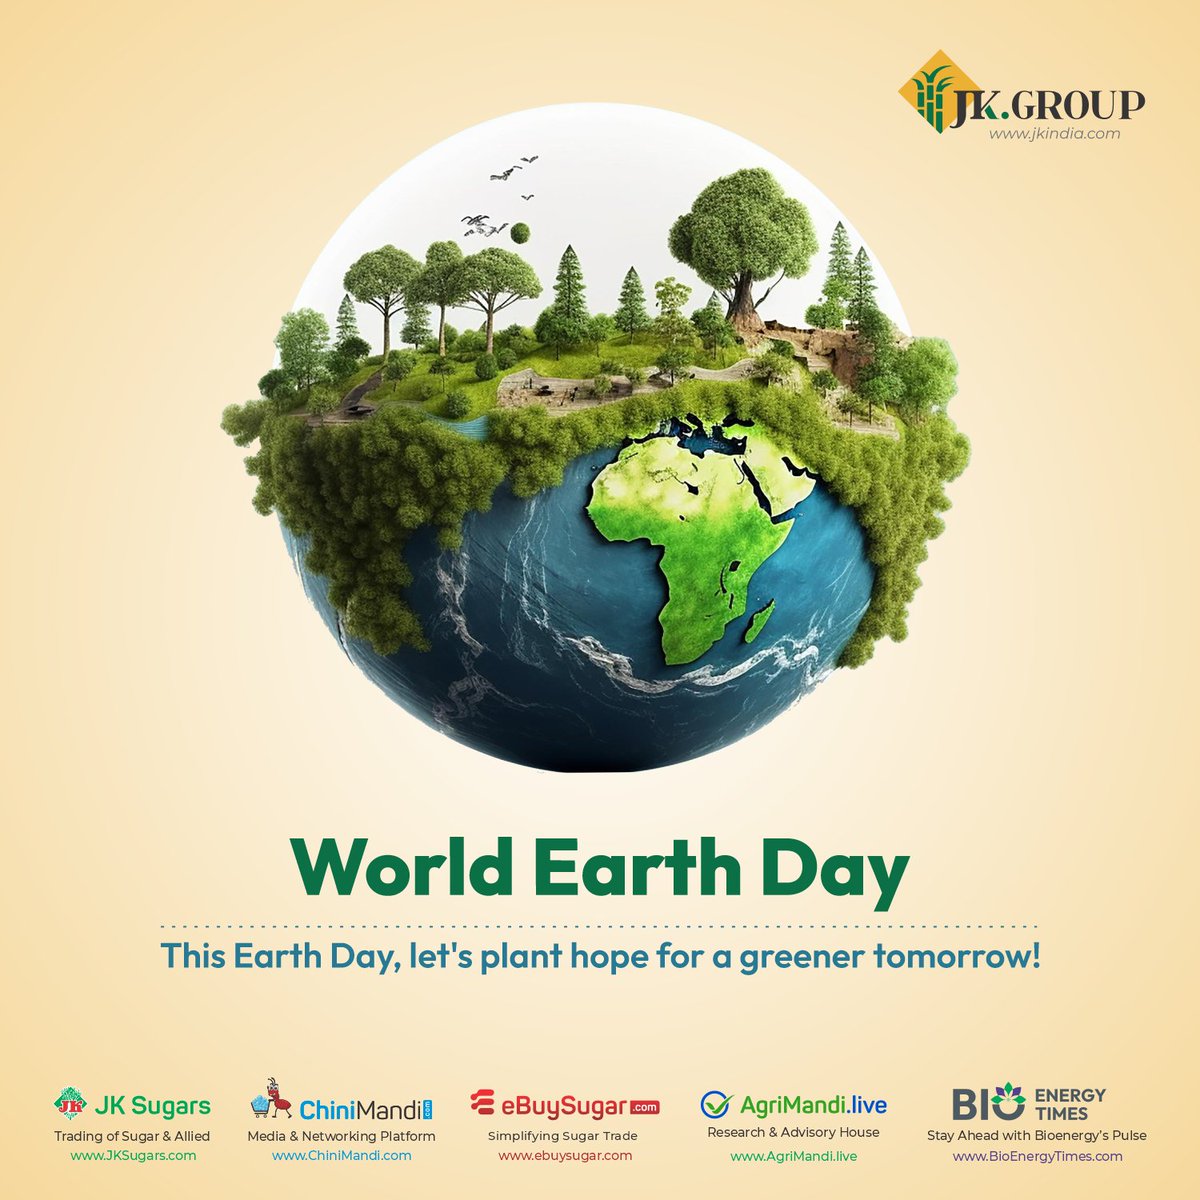 Let's celebrate World Earth Day & honour our beautiful planet. It's a reminder for us to cherish and protect the Earth's precious resources. Let's pledge to take action, big or small, to preserve our environment for generations to come. 🌱 Happy World Earth Day! @ChiniMandi